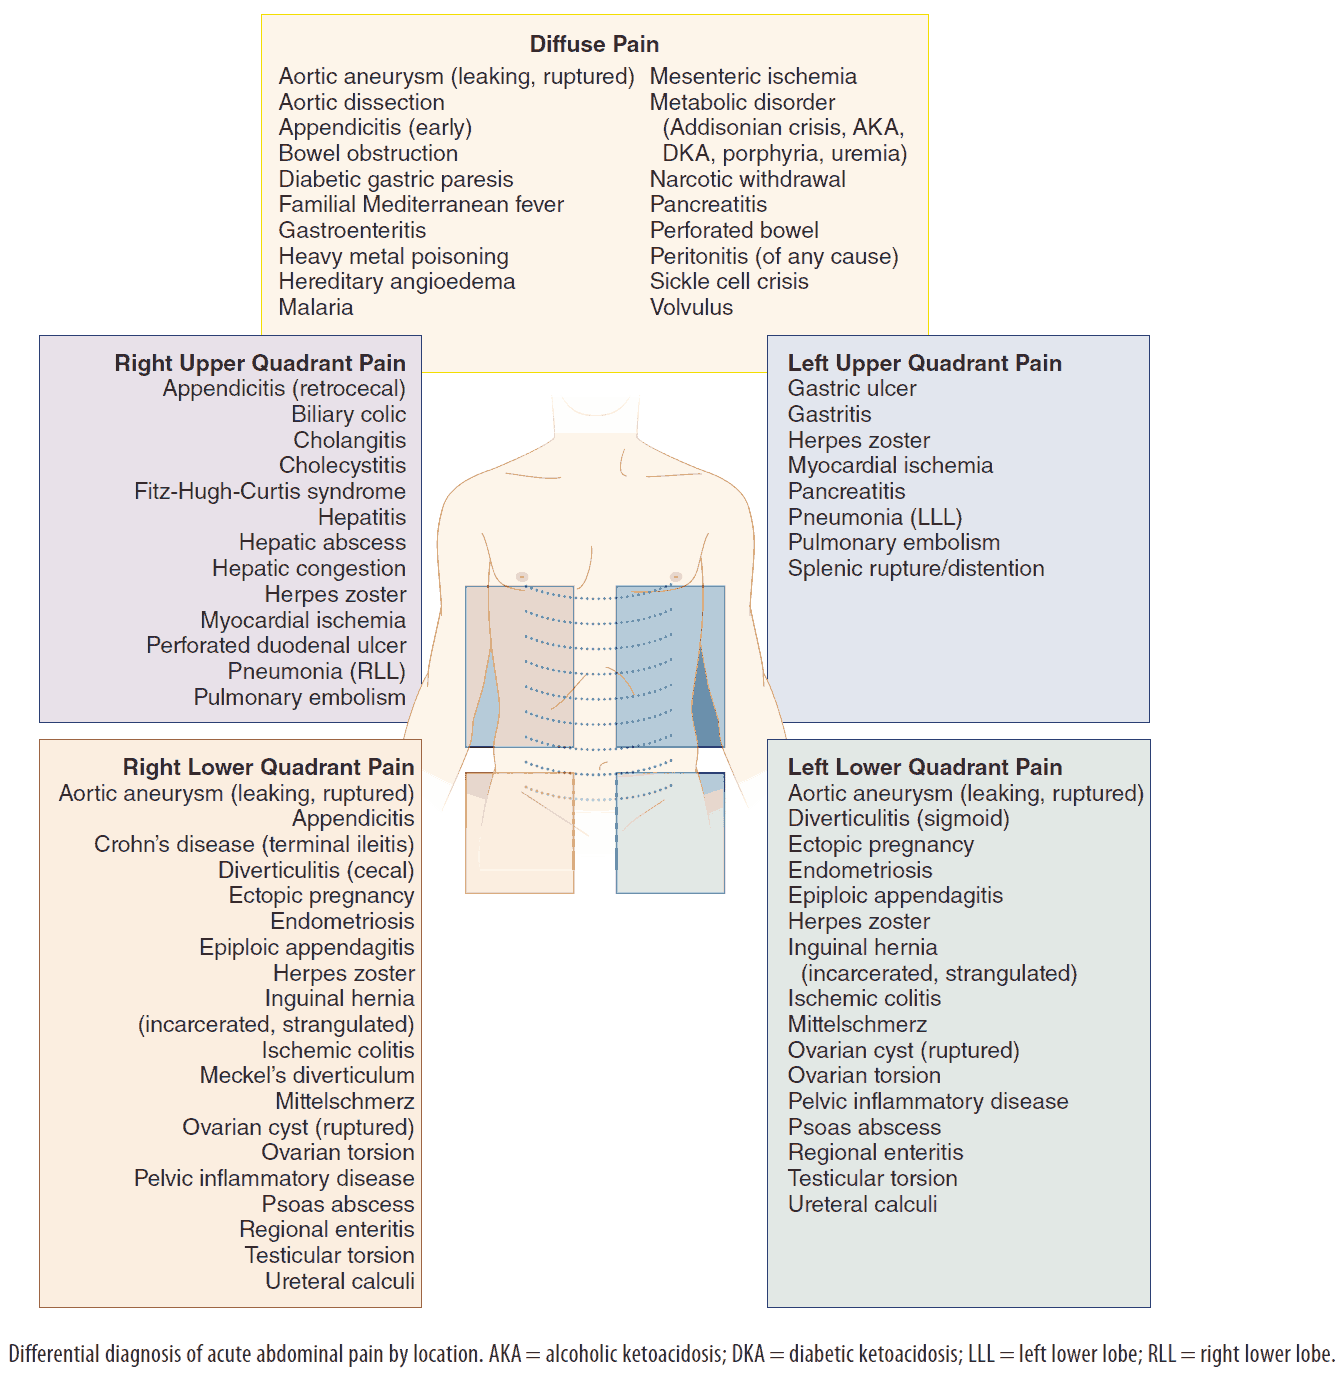 Differential diagnosis of acute abdominal pain by location